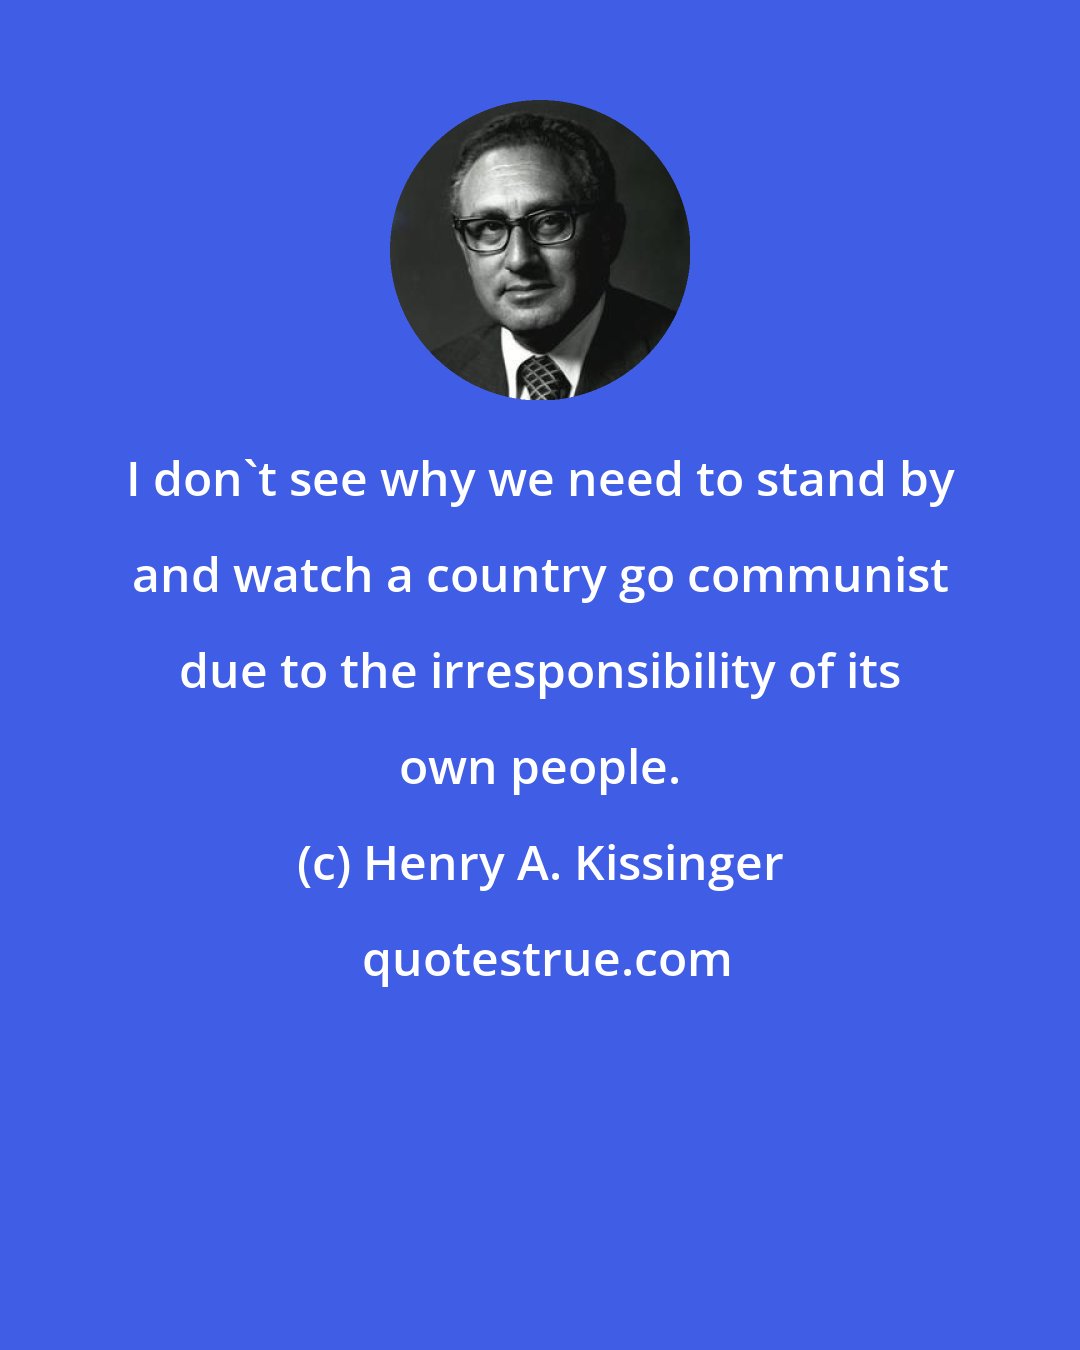 Henry A. Kissinger: I don't see why we need to stand by and watch a country go communist due to the irresponsibility of its own people.